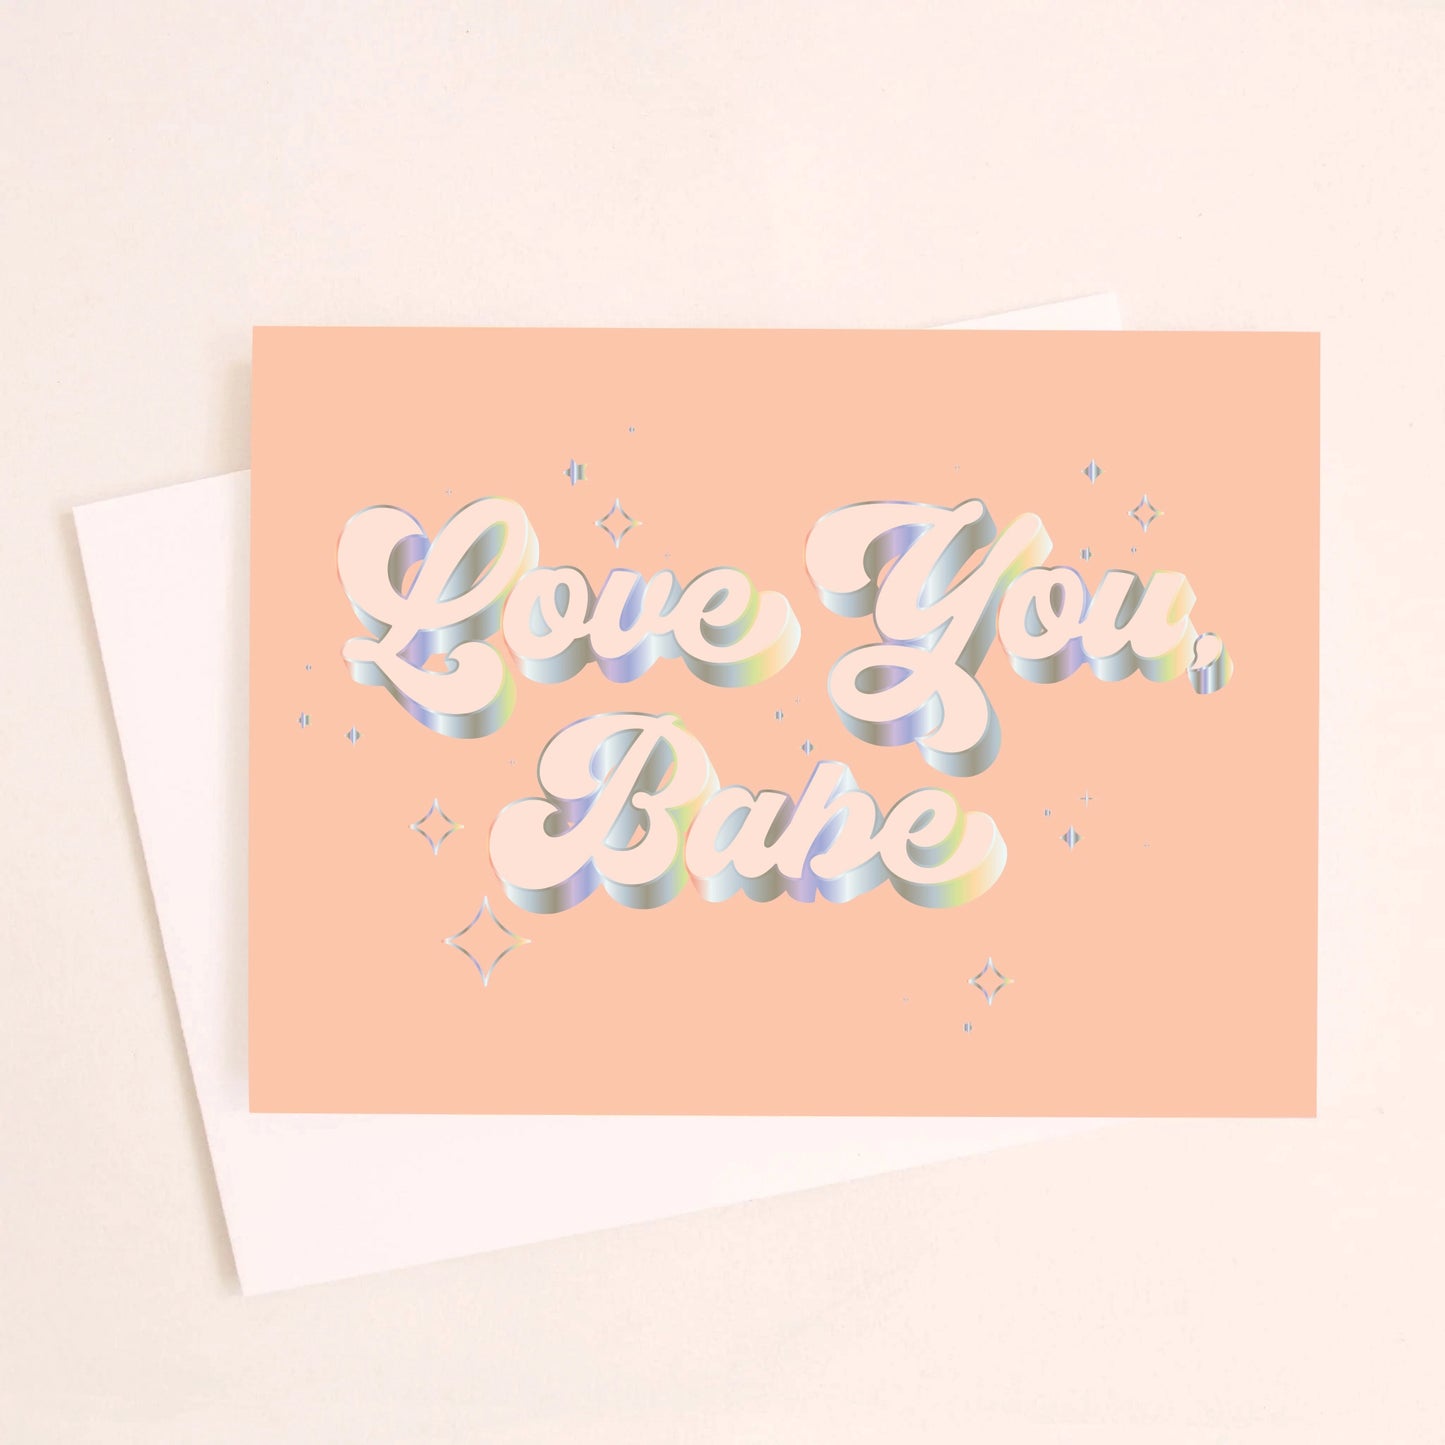 On a light peach background is a peachy greeting card with "Love You Babe" text in the center that is outlined with holographic foil detailing. Also included is a white envelope. 